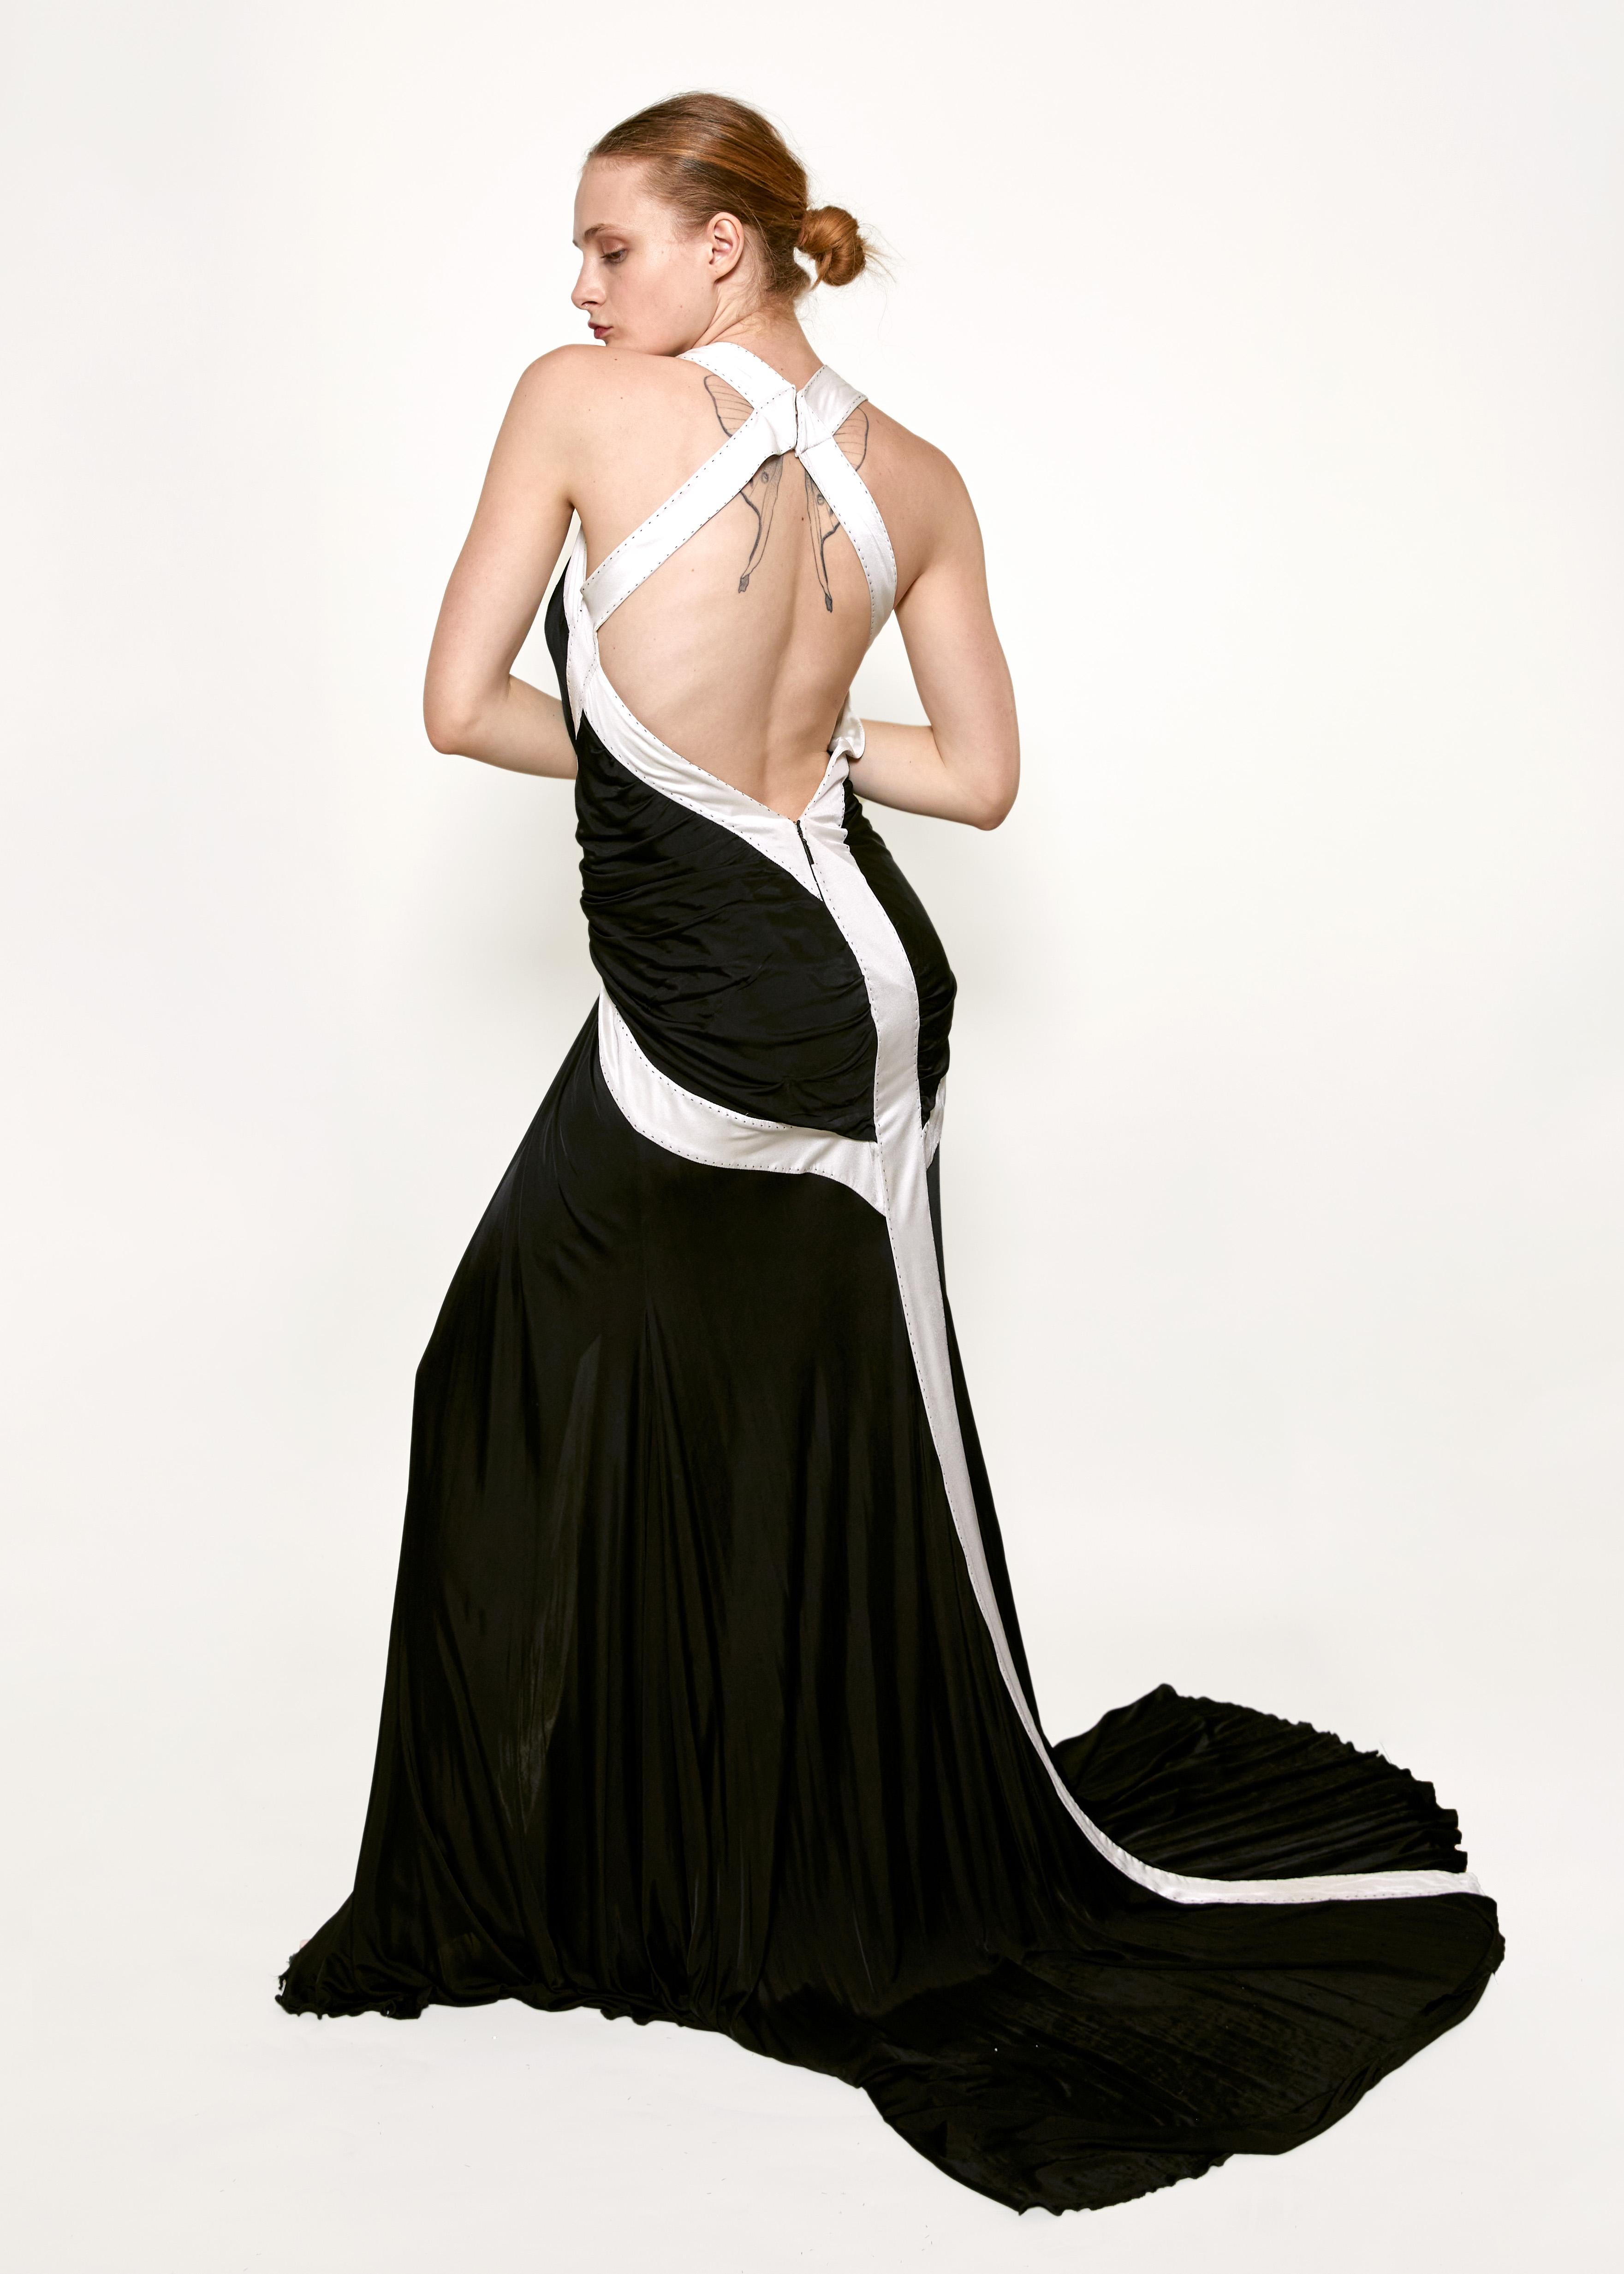 Roberto Cavalli 2008 Black/ White Low Back Gown In Good Condition For Sale In Los Angeles, CA